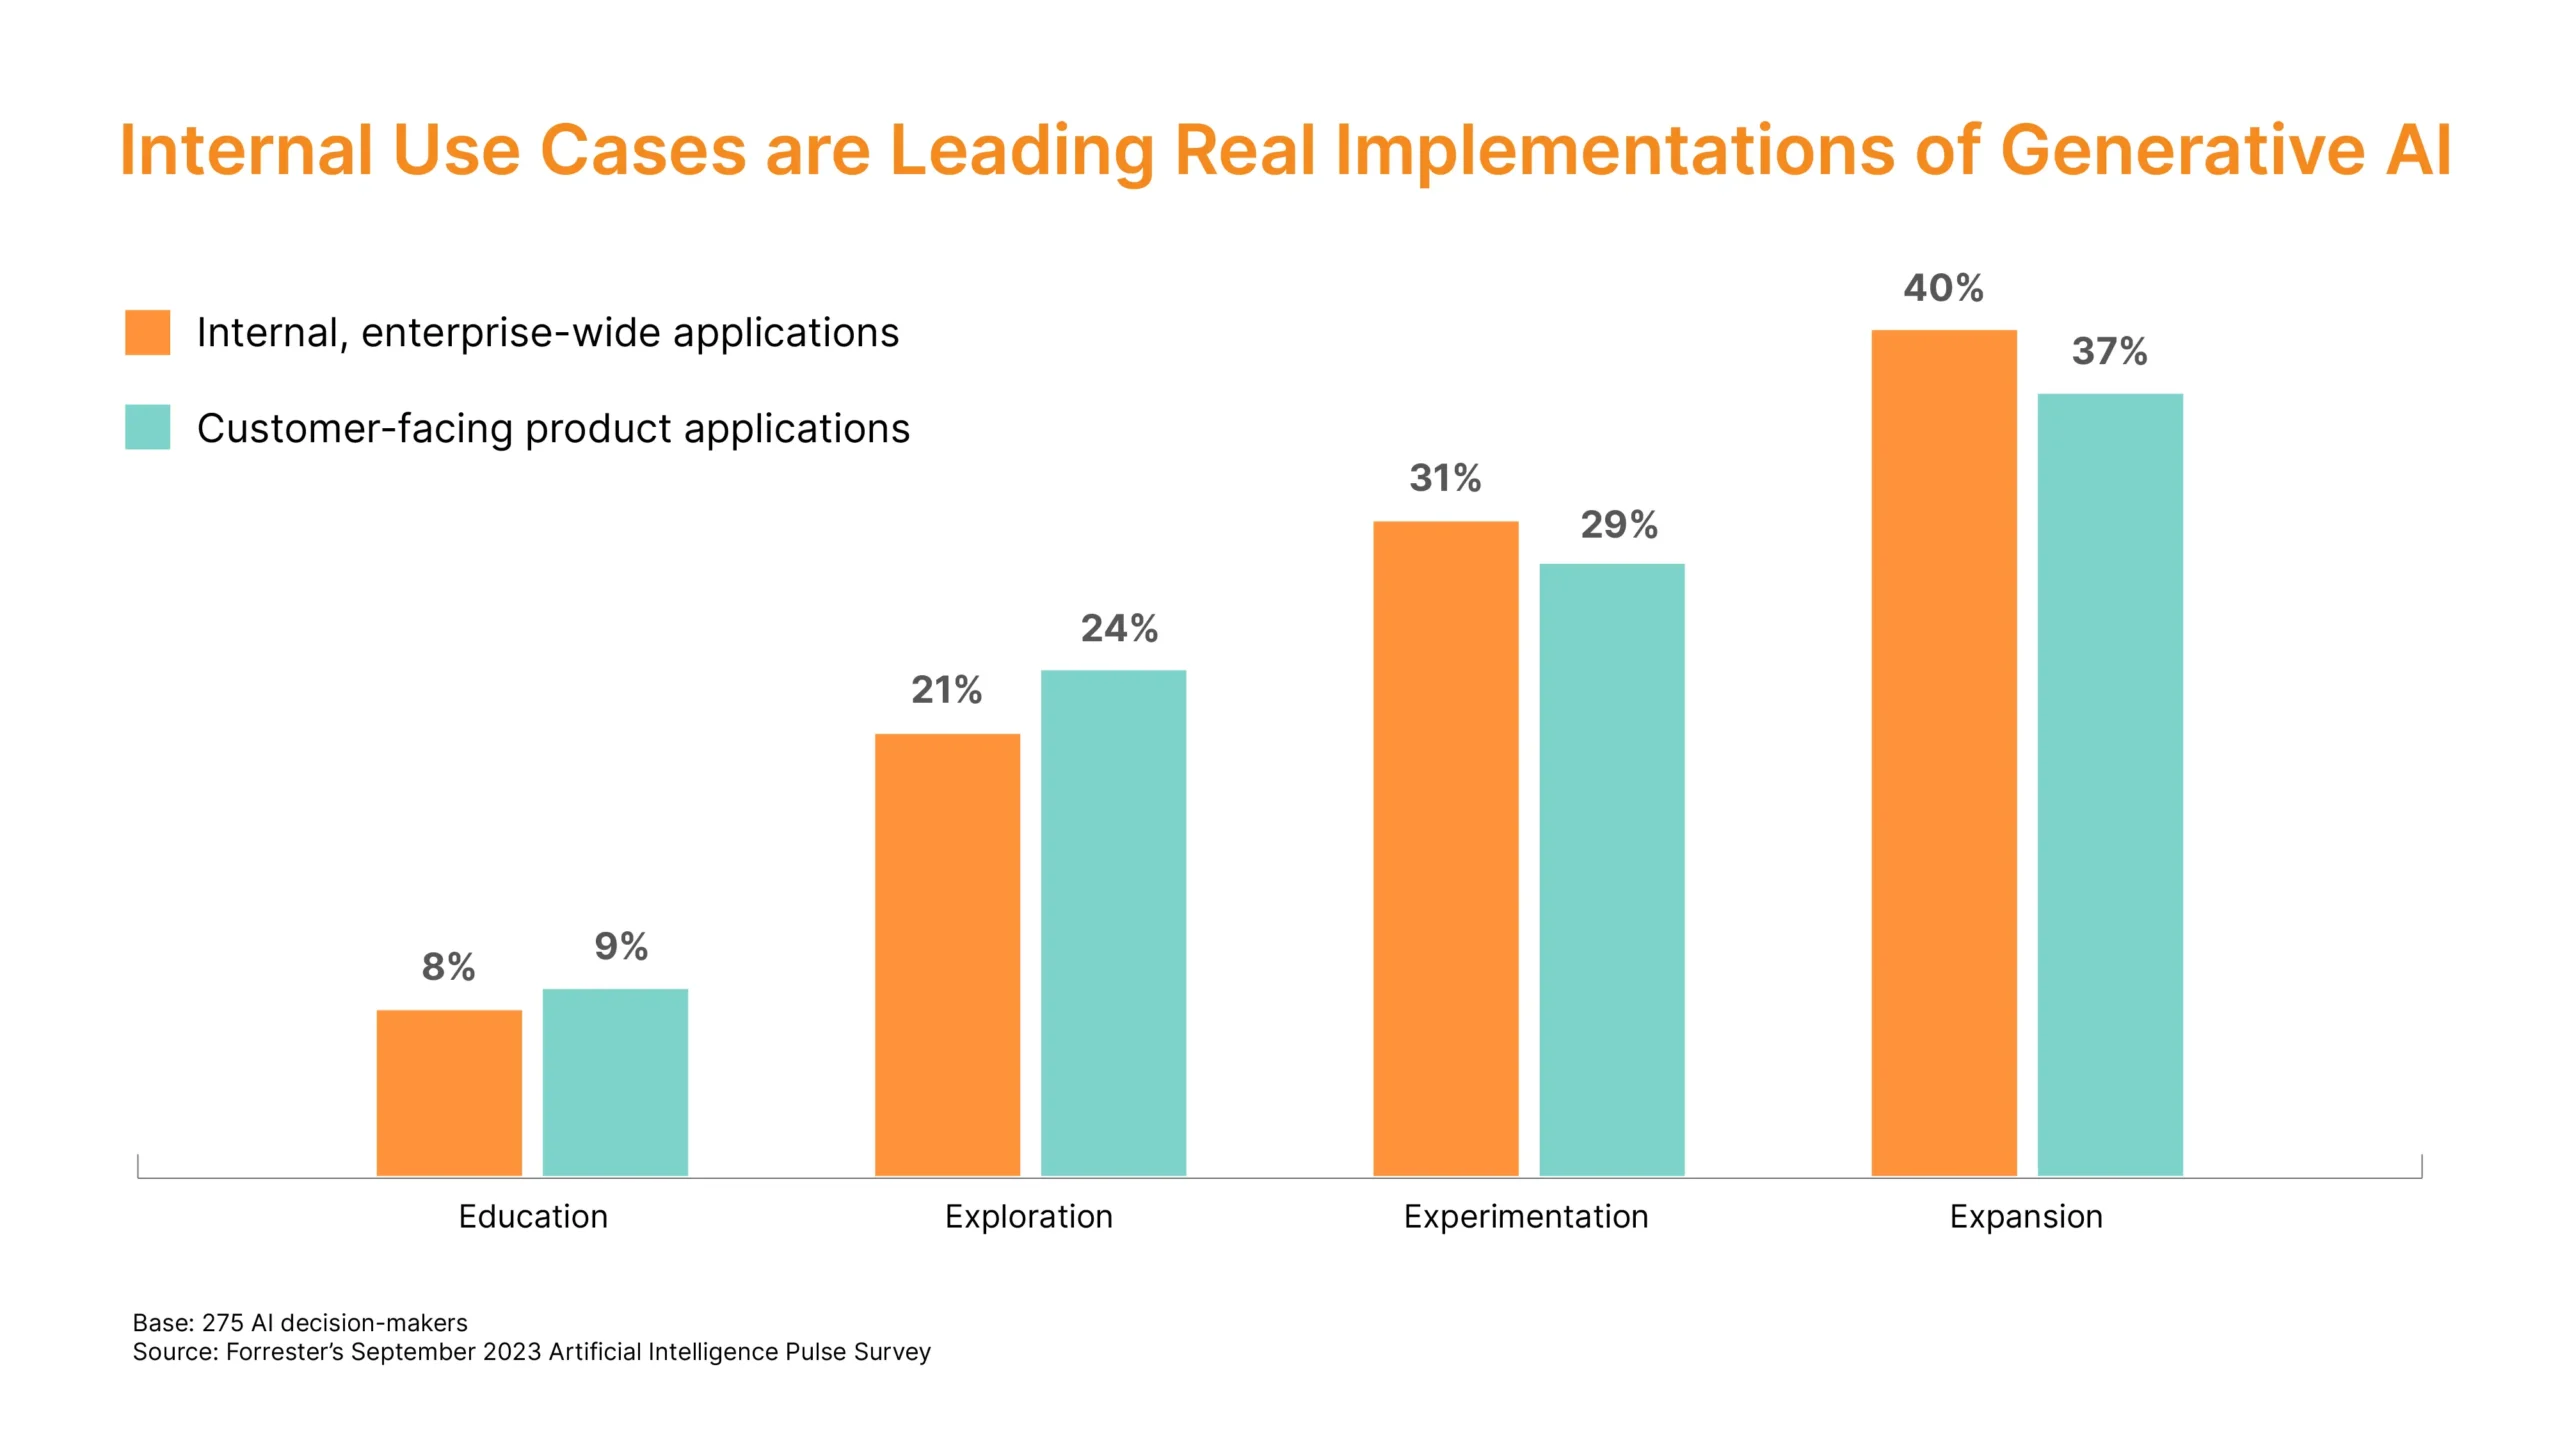 Internal Use Cases are Leading Real Implementations of Generative Al